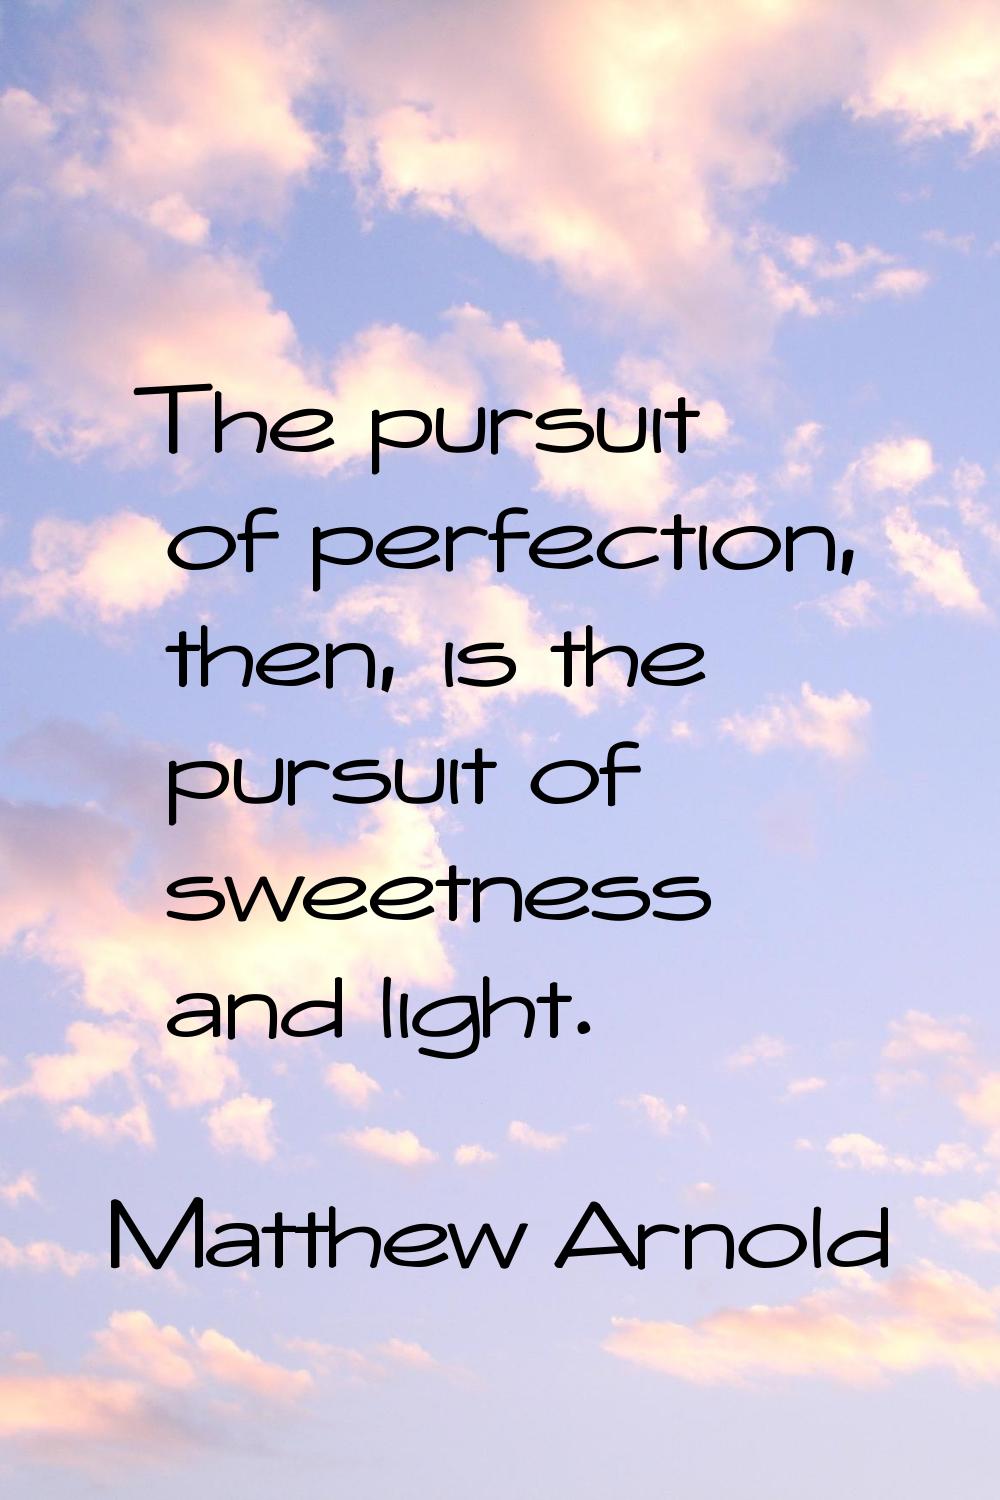 The pursuit of perfection, then, is the pursuit of sweetness and light.